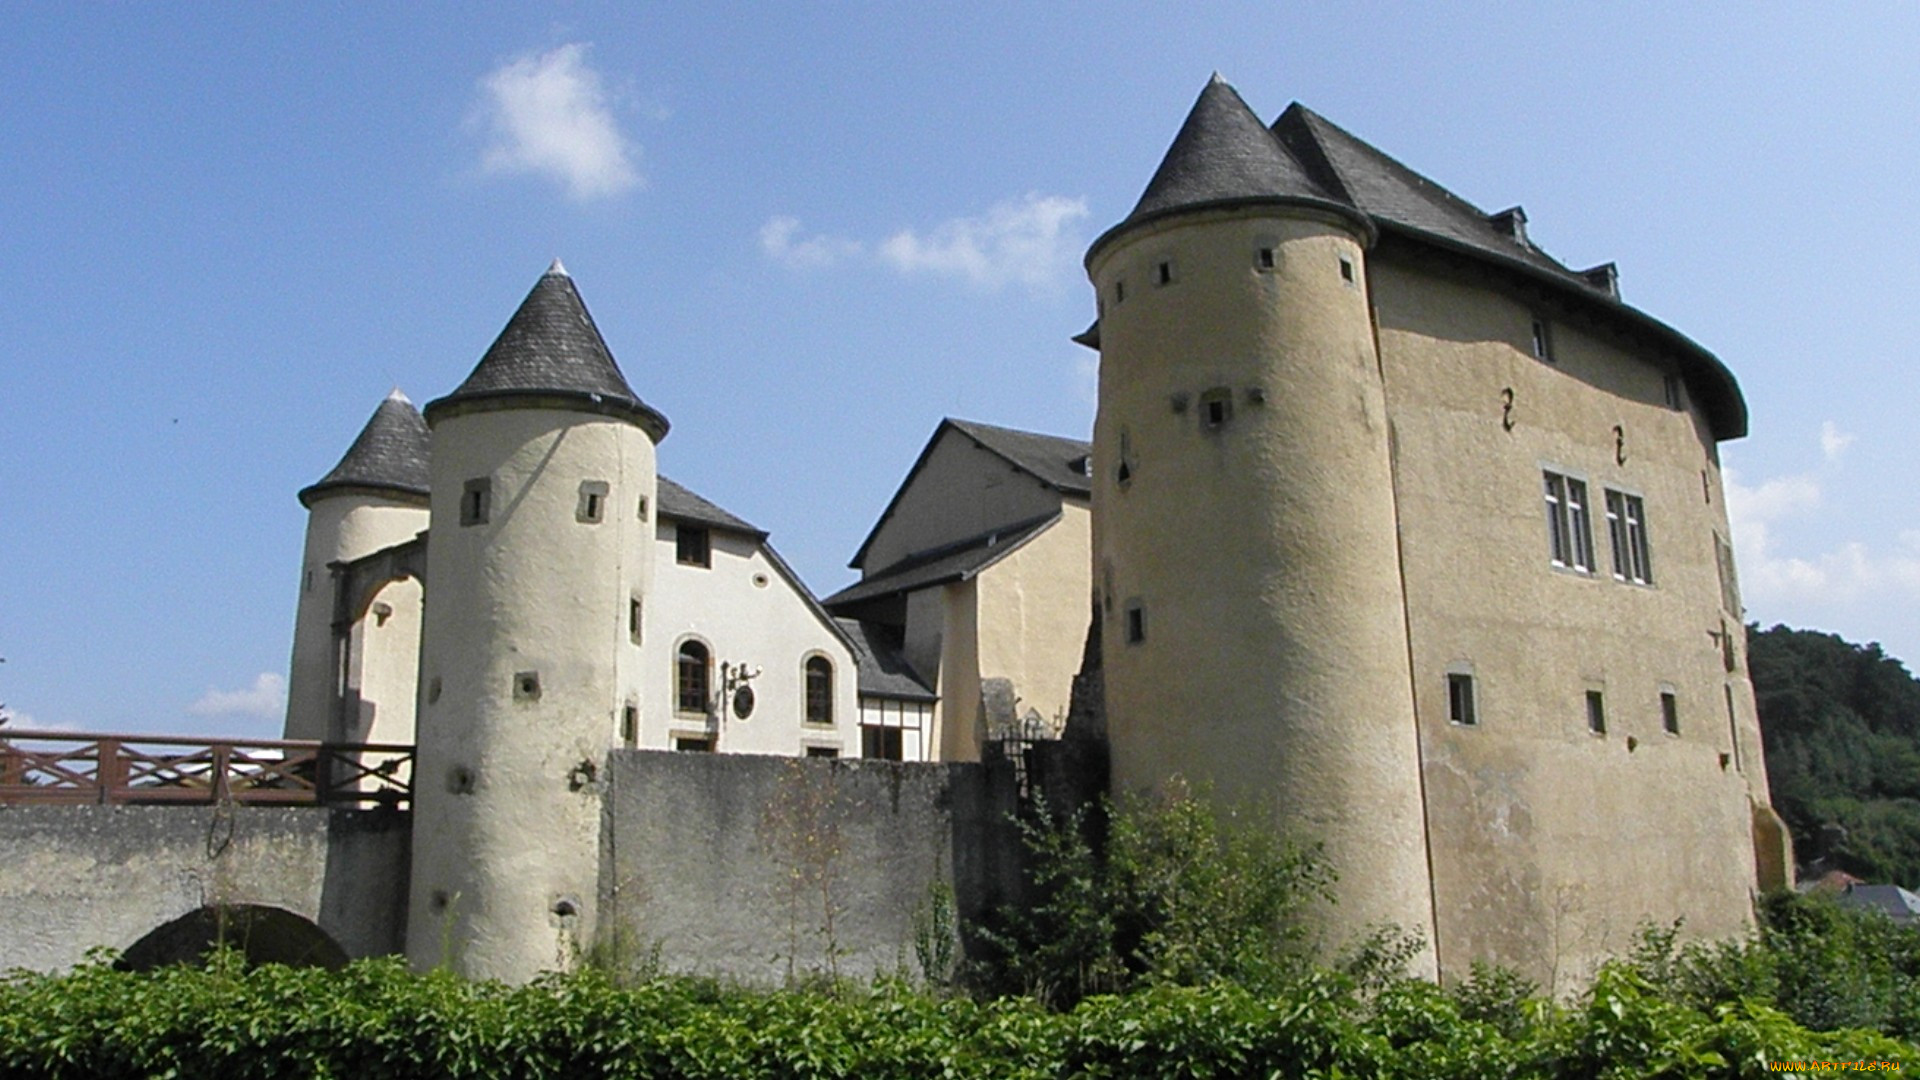 chateau de bourglinster, luxembourg, , - ,  ,  , chateau, de, bourglinster